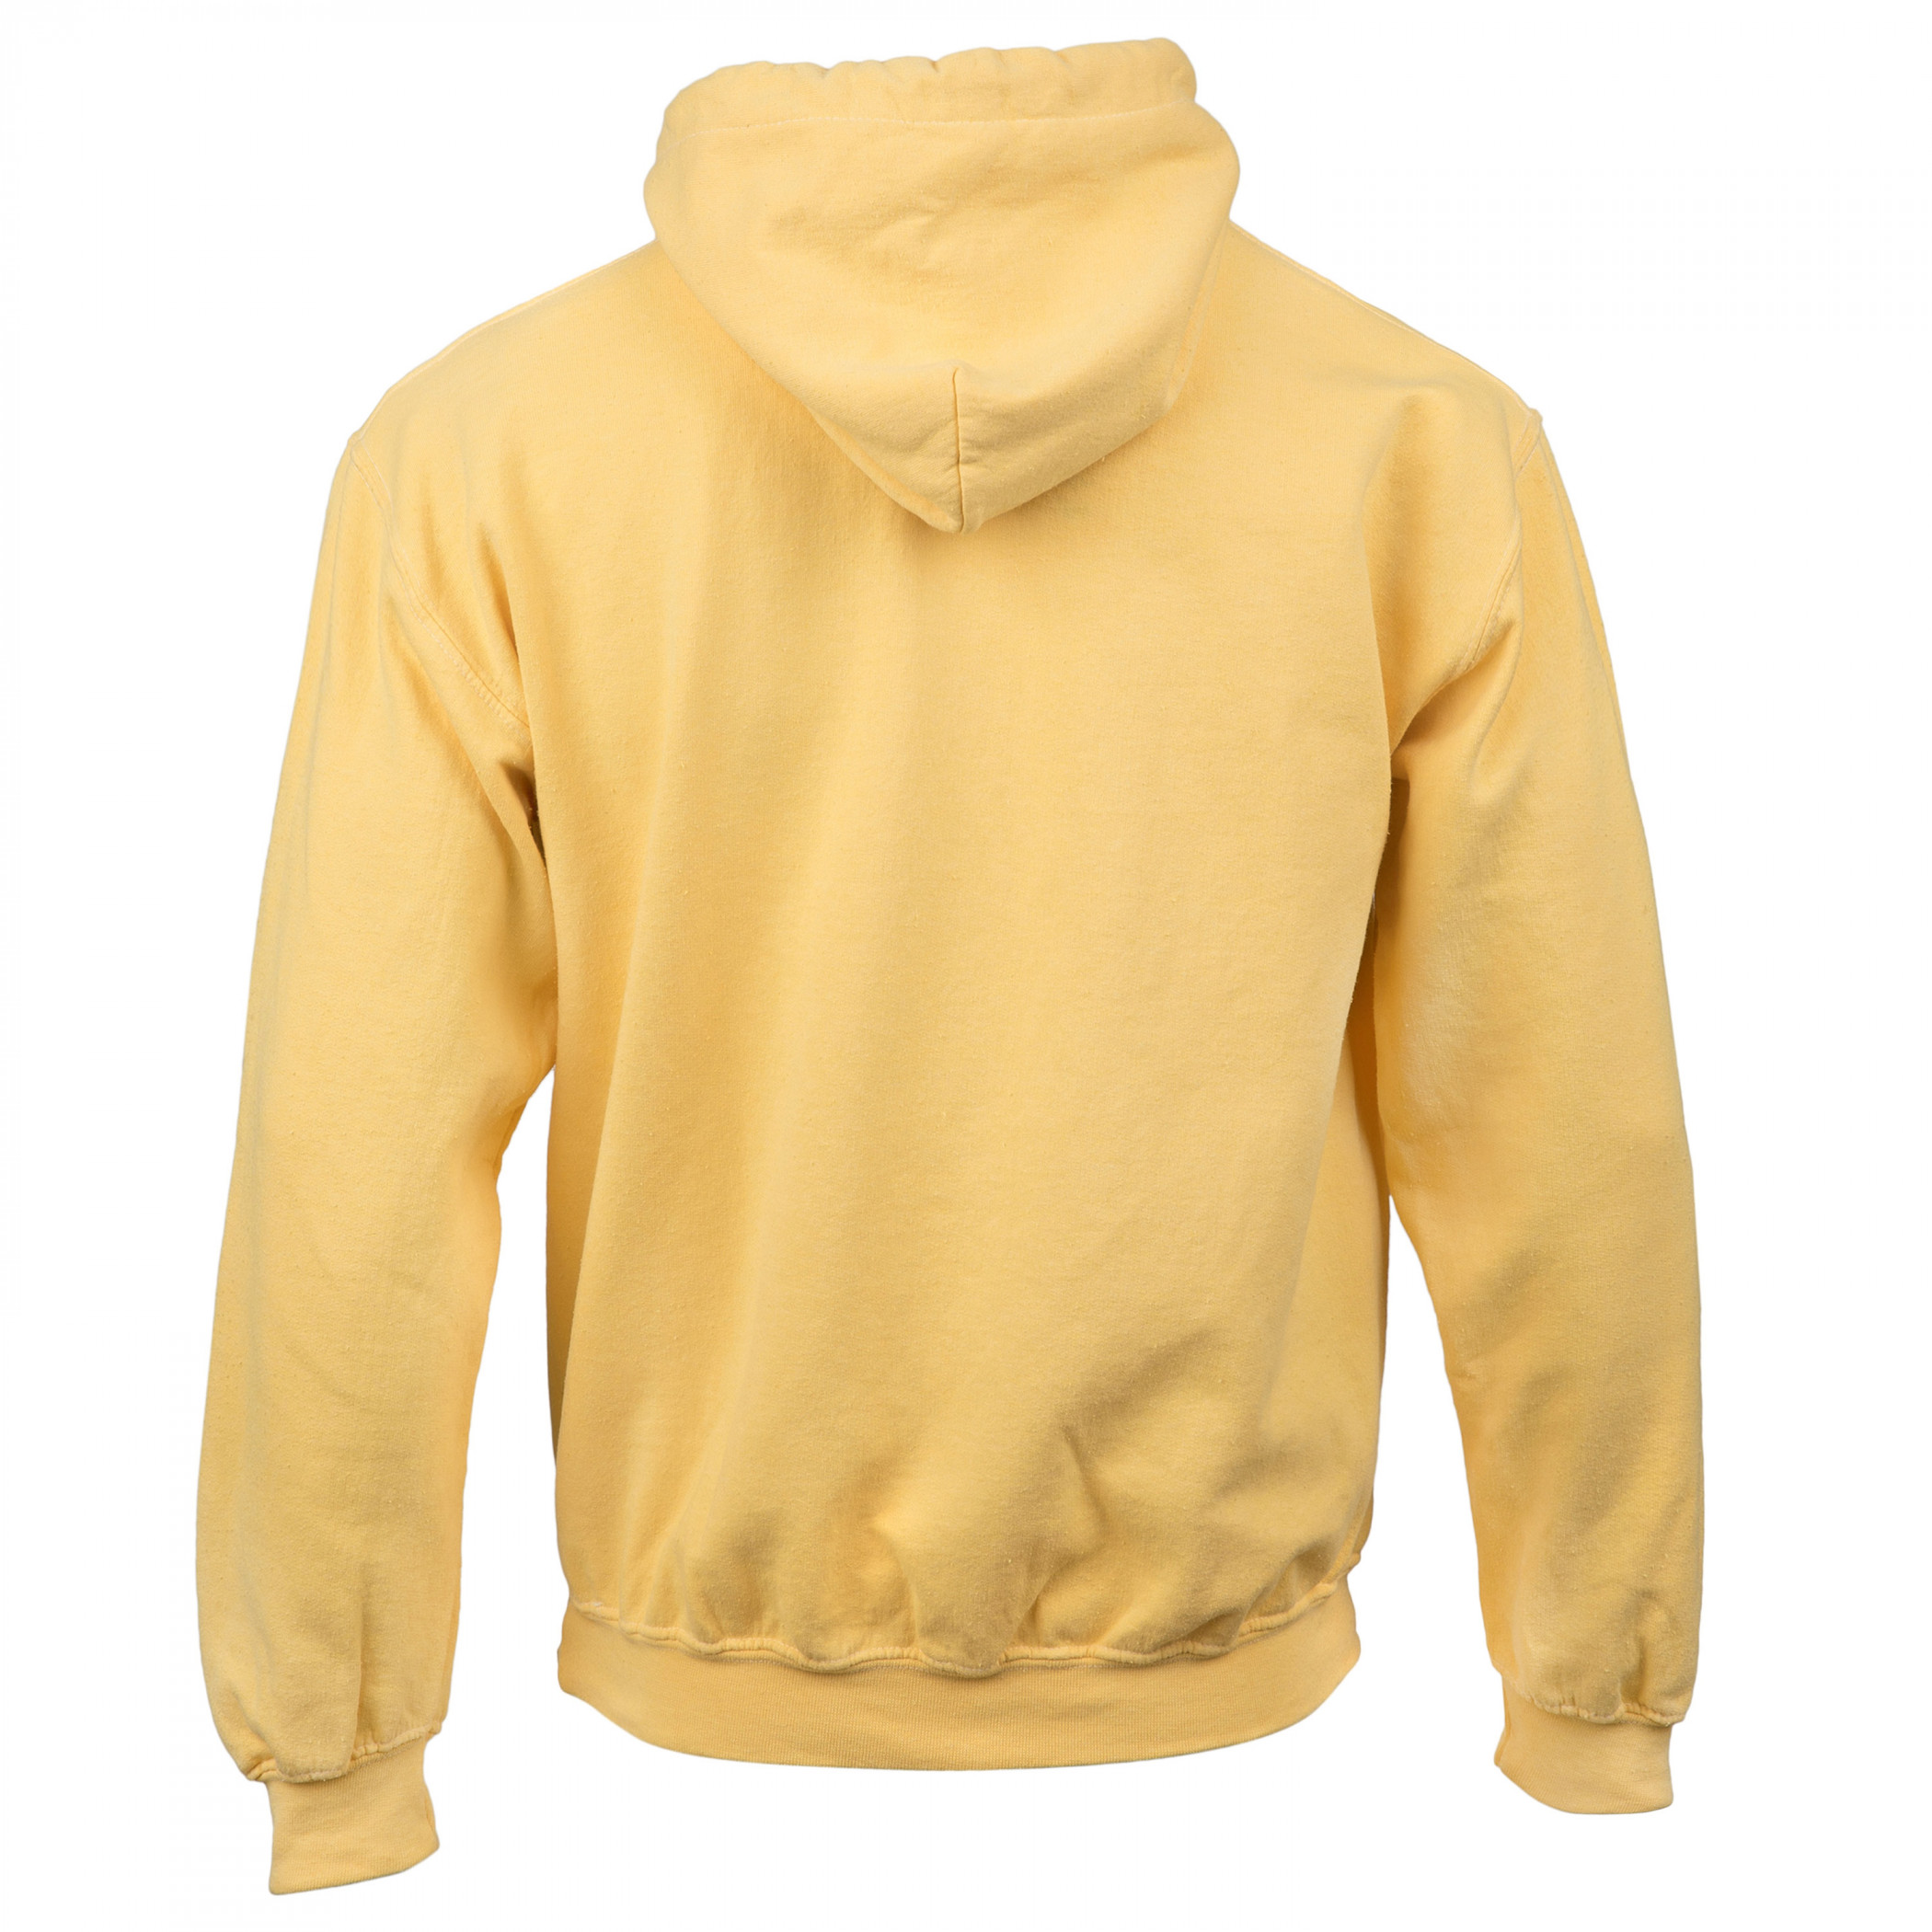 Coors Banquet Logo Yellow Colorway Hoodie | Brew-Shirts.com